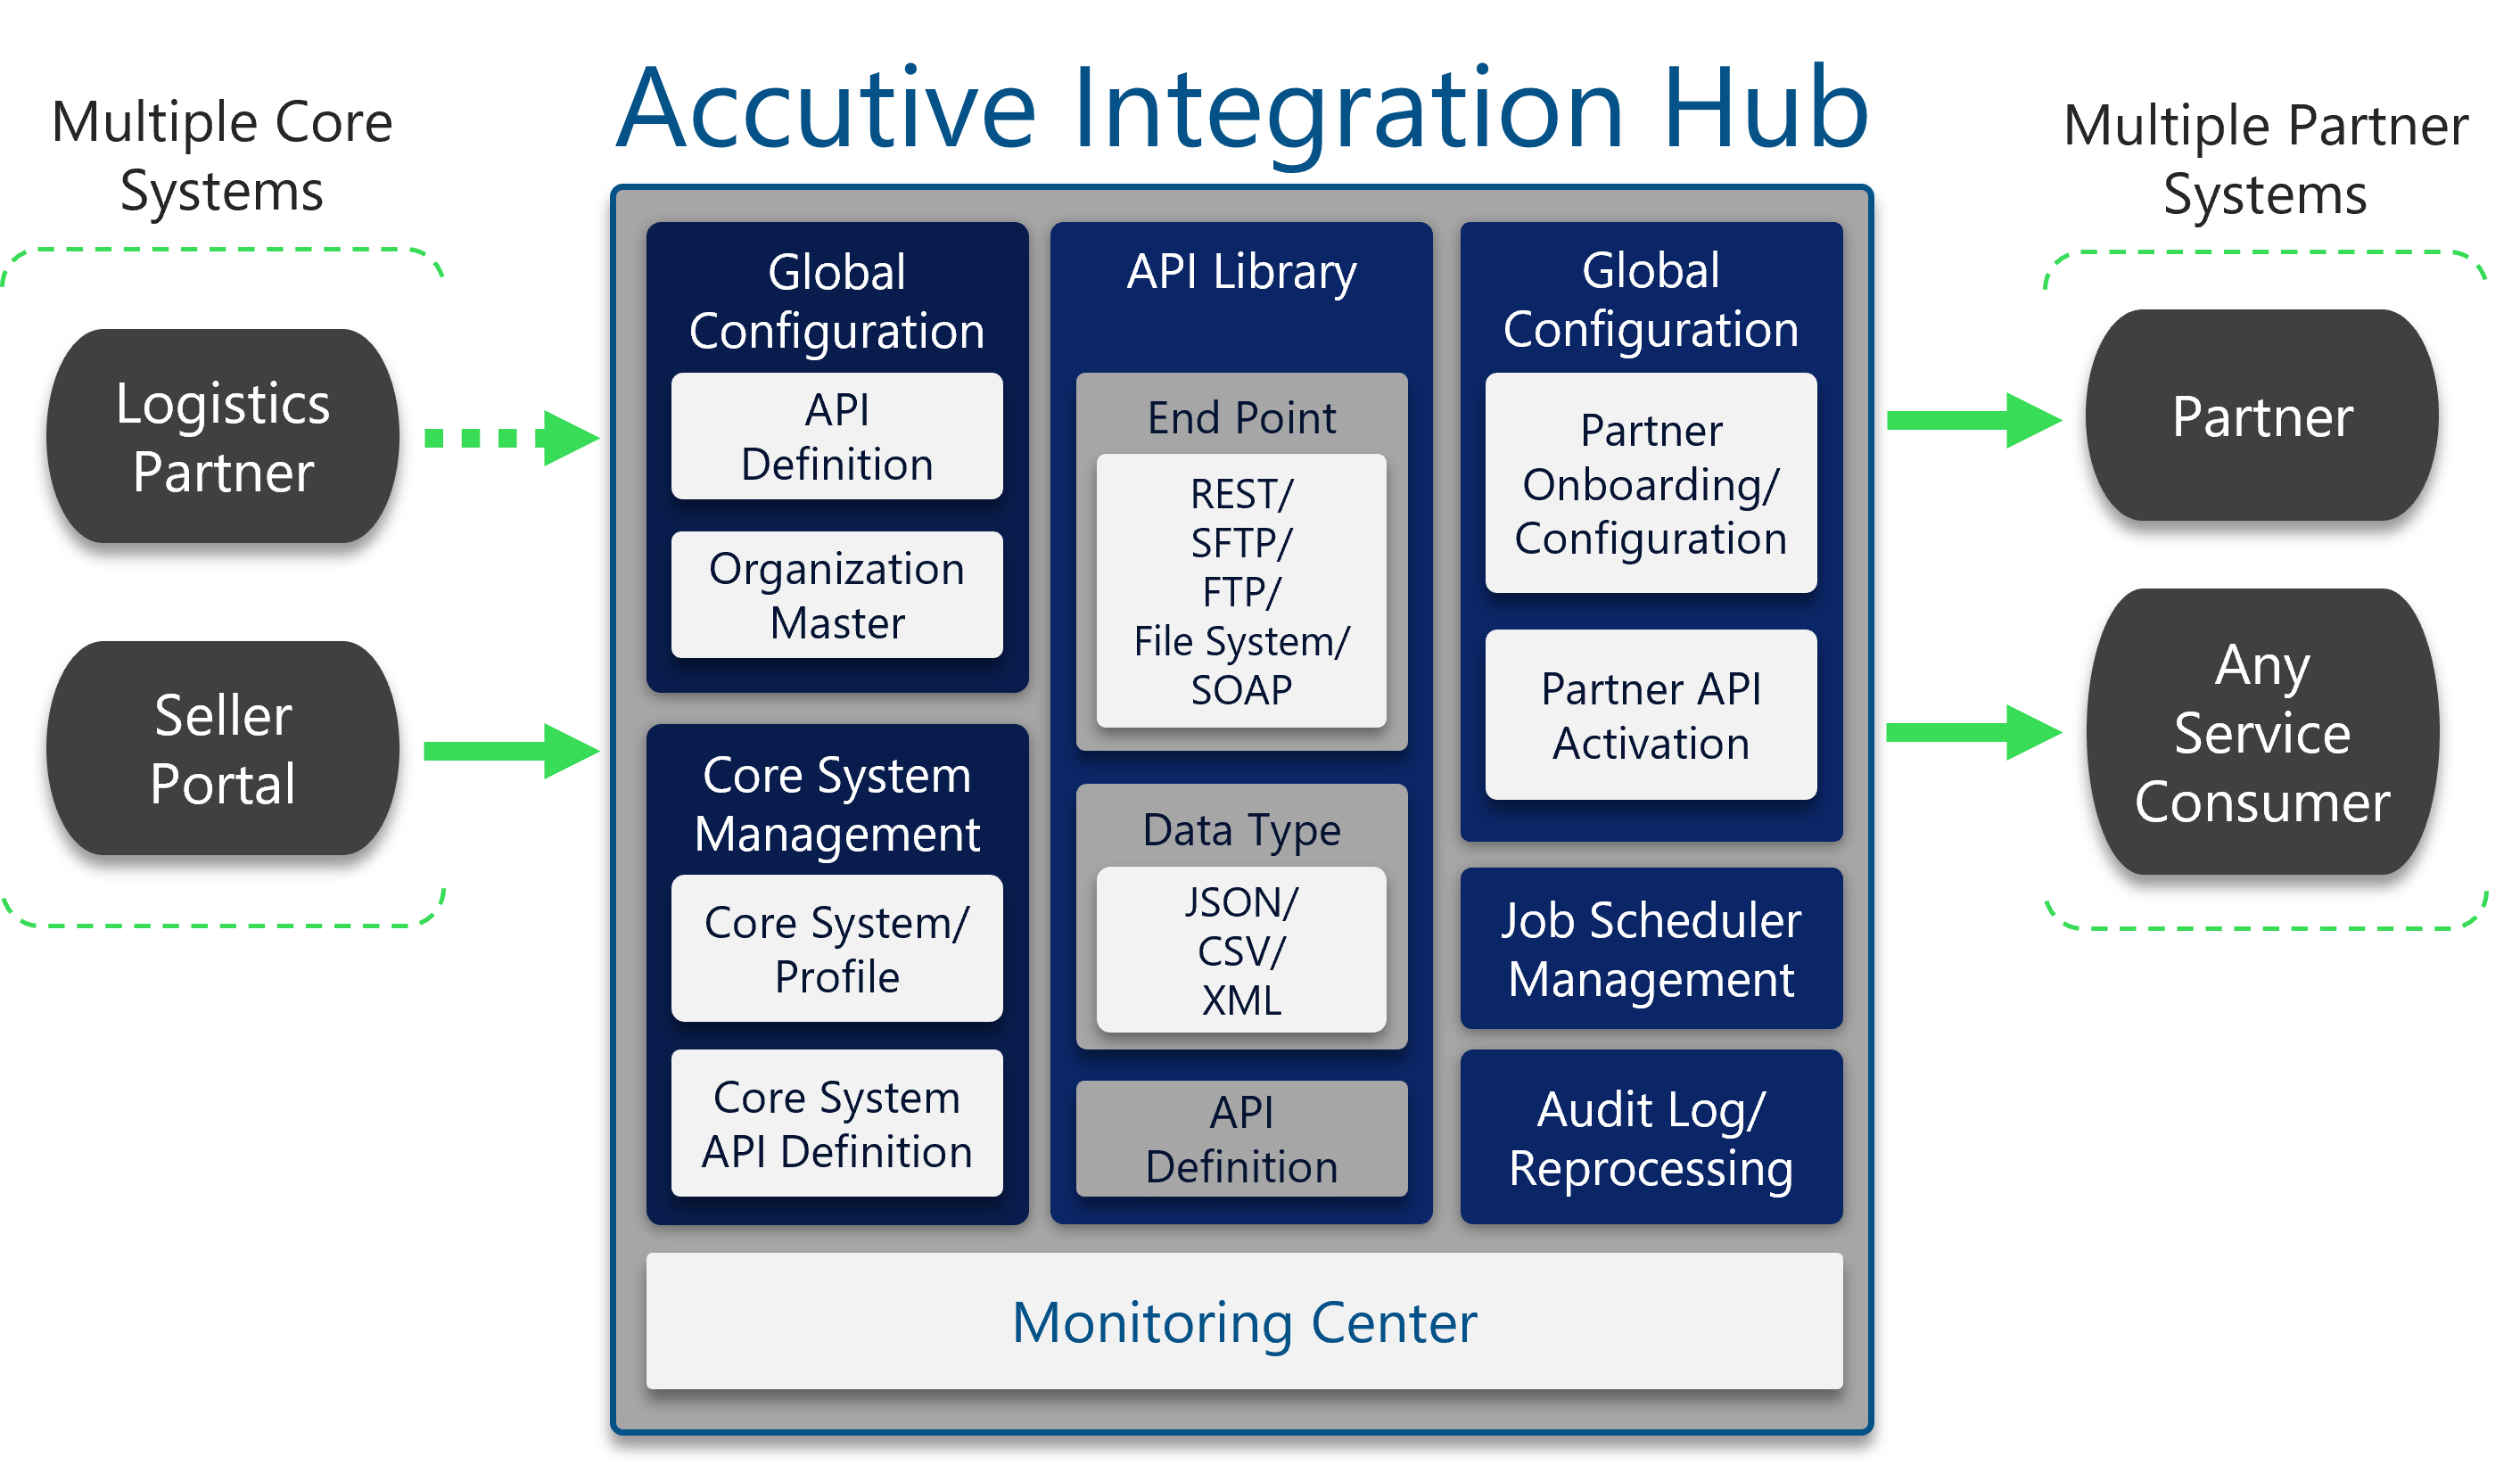 A diagram of the Accutive Integration Hub depicting the flow of information and processes from multiple core systems through the Integration Hub to multiple partner systems.